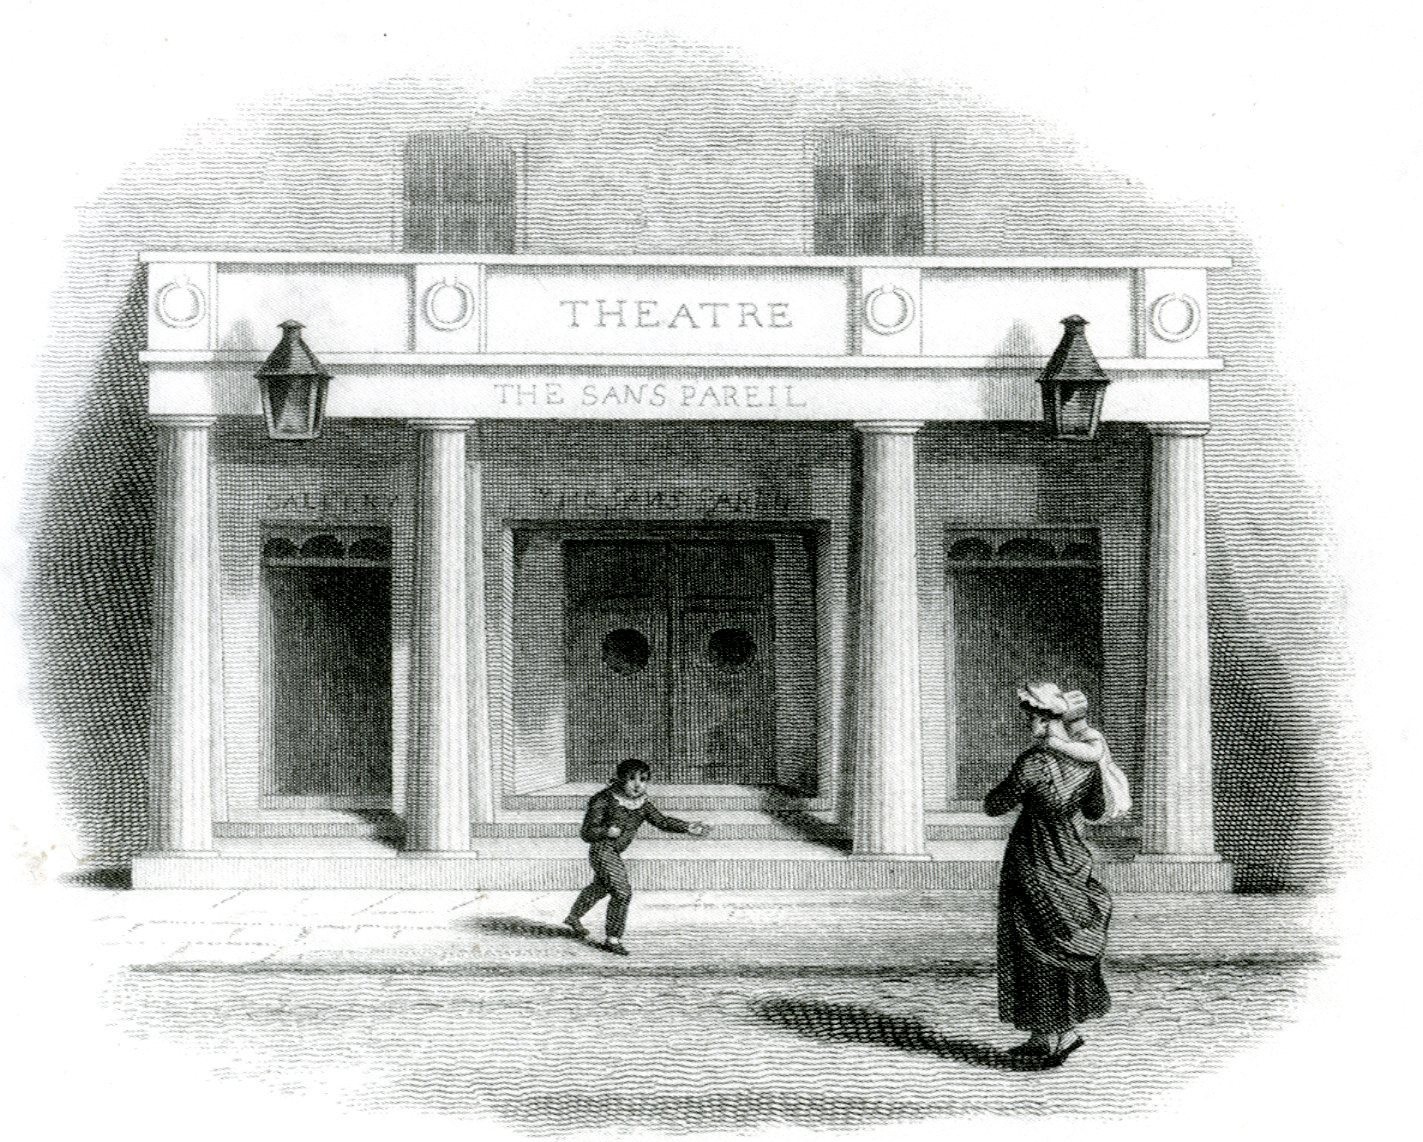 A vintage illustration of the Sans Pareil Theatre entrance. The theater has neoclassical architectural features, including columns and a sign reading Theatre The Sans Pareil. A woman holds a child and a child runs towards them on the paved street.